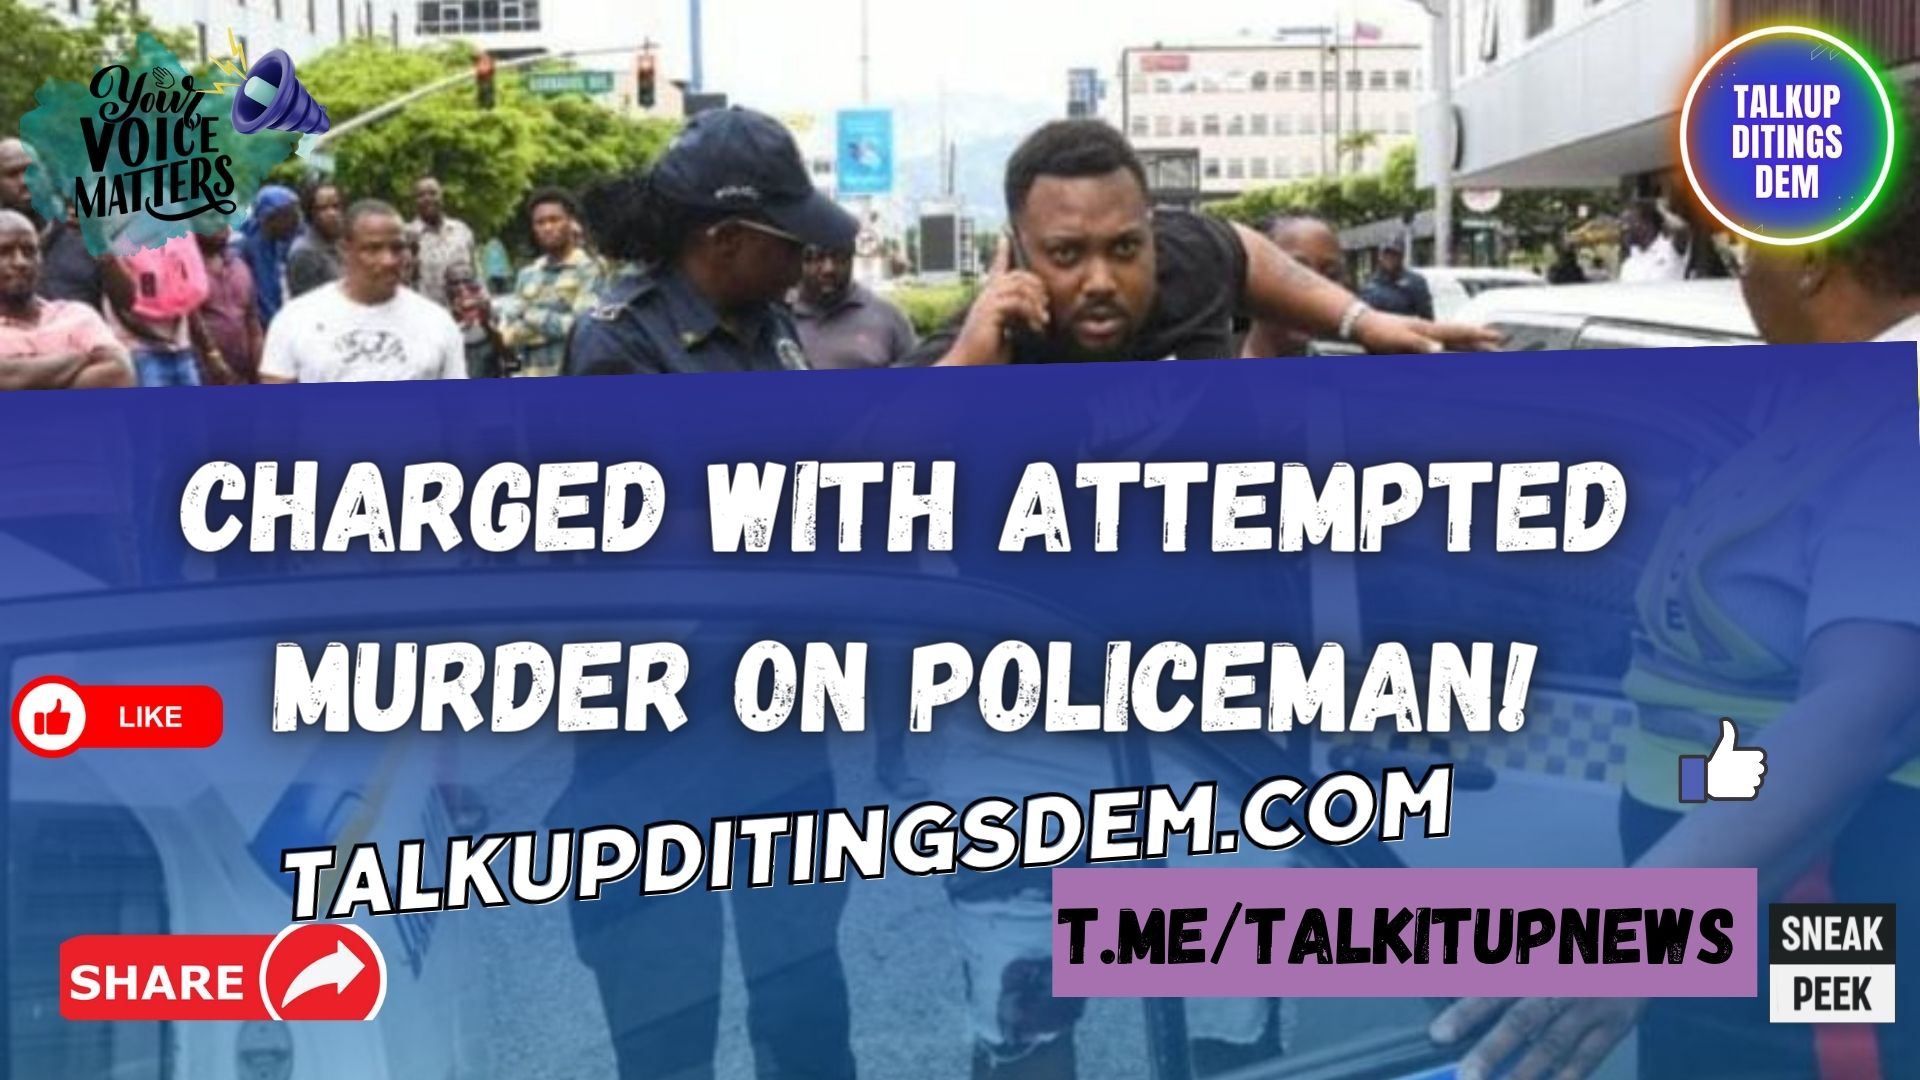 Charged with Attempted Murder on Policeman!